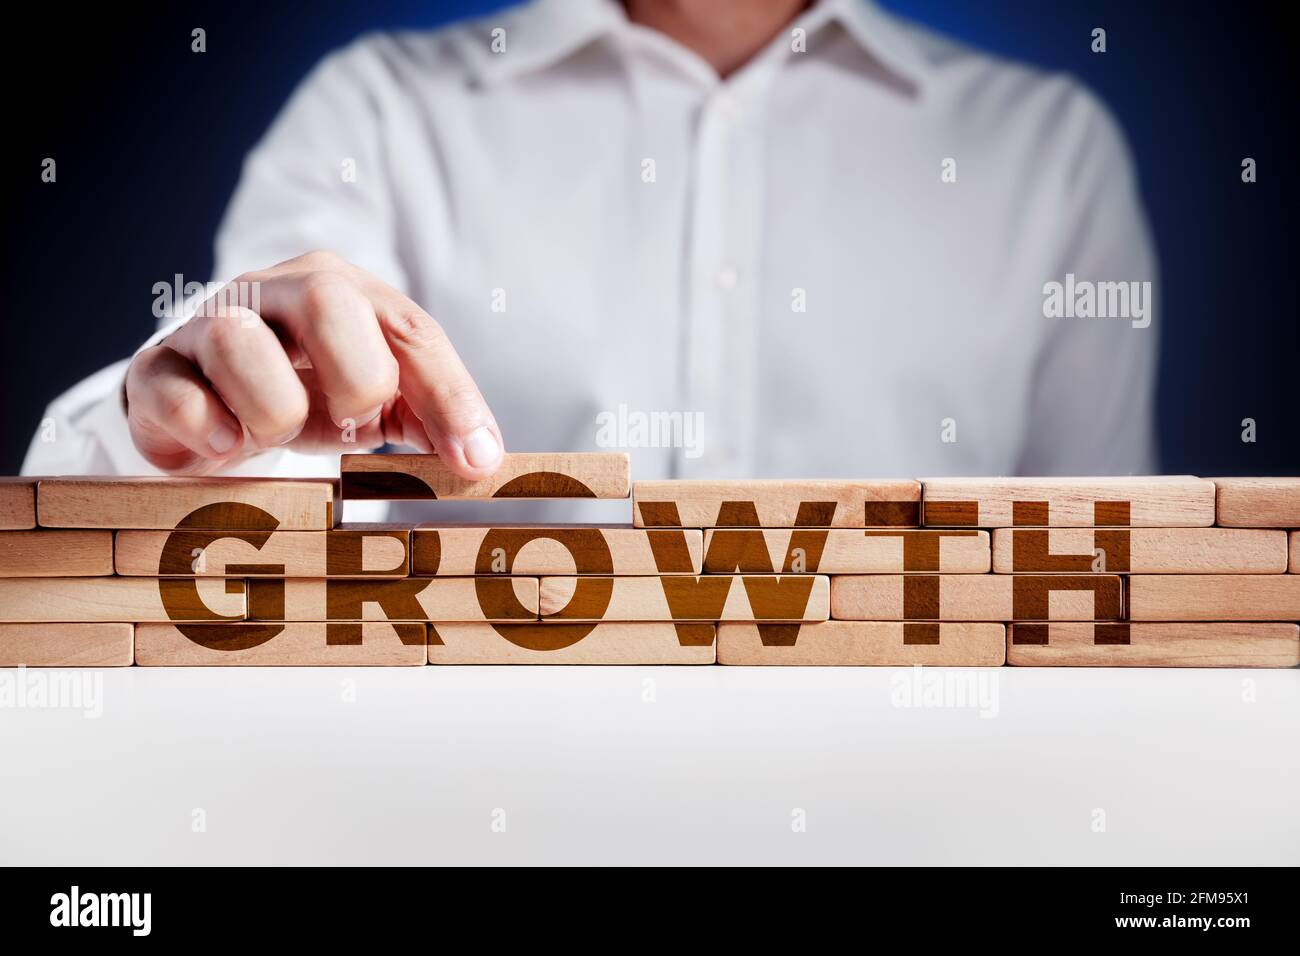 Businessman builds a structure of wooden blocks with the word growth. Business or career growth concept. Stock Photo